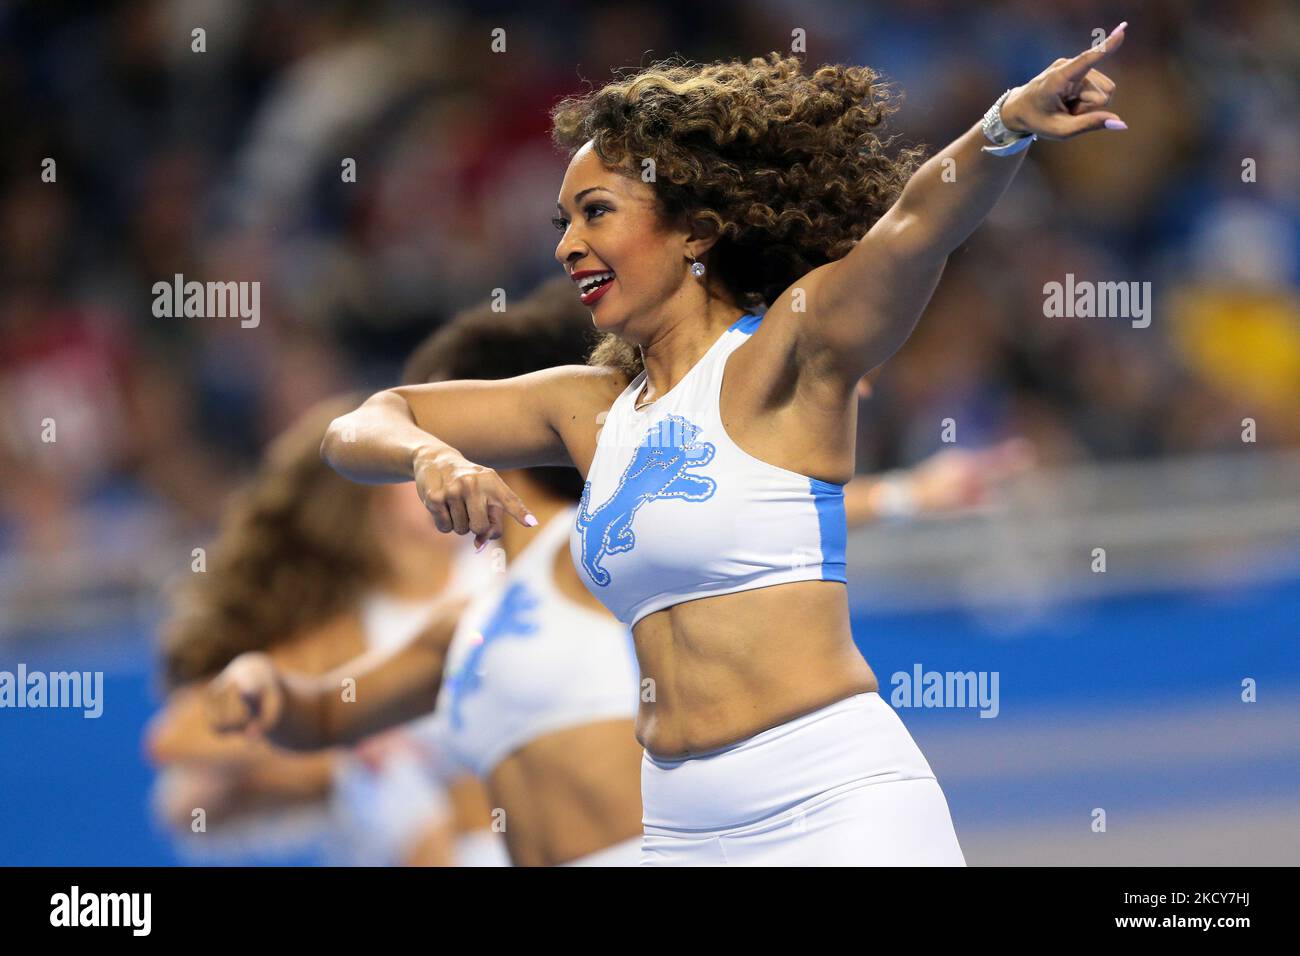 Detroit Lions cheerleaders perform during the second half of an NFL football game between the Arizona Cardinals and the Detroit Lions in Detroit, Michigan USA, on Sunday, December 19, 2021. (Photo by Jorge Lemus/NurPhoto) Stock Photo